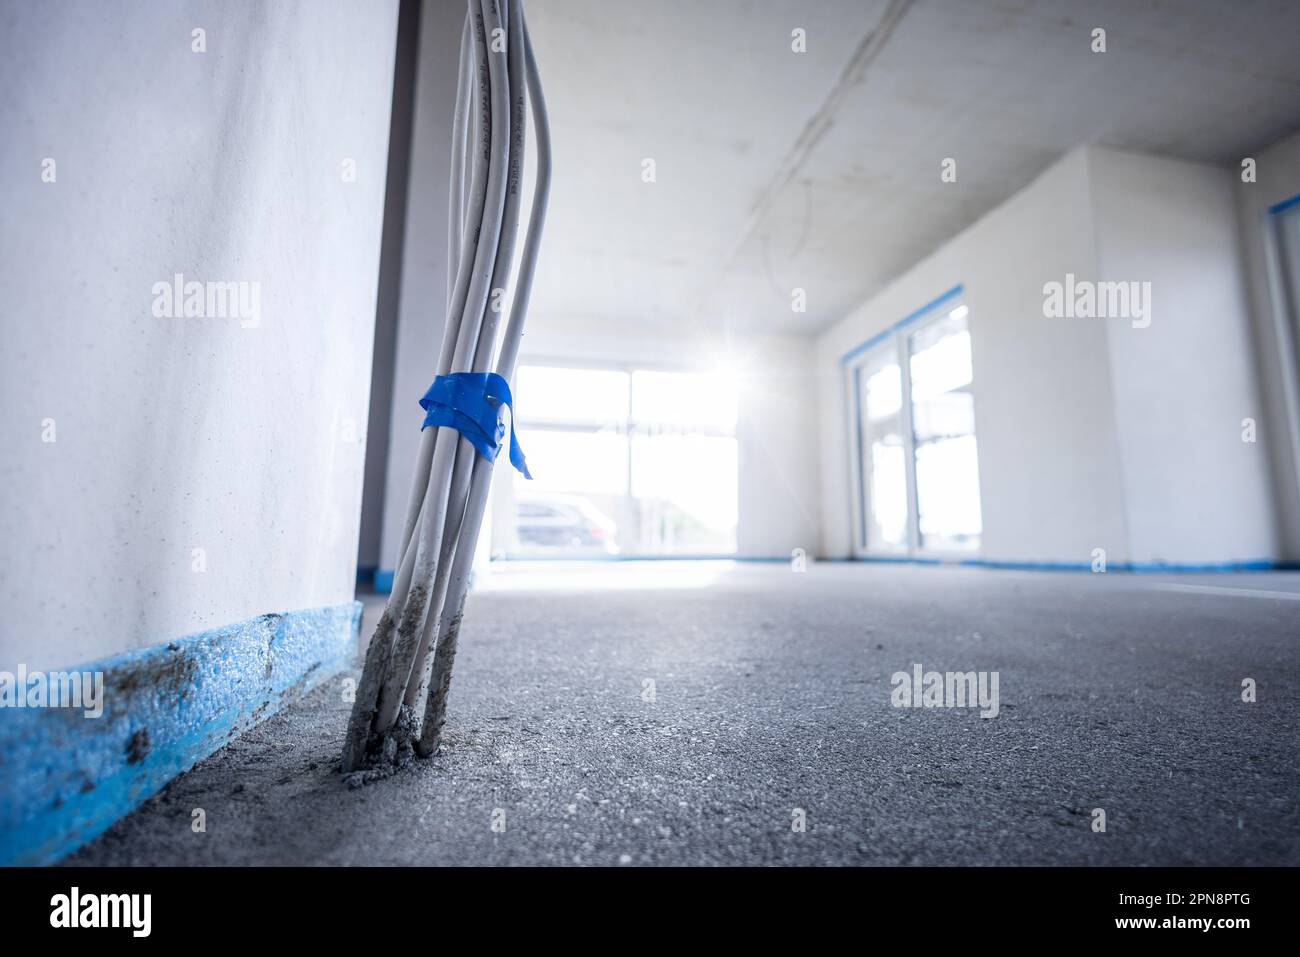 Interior of a building under construction with wiring emerging from the floor Stock Photo